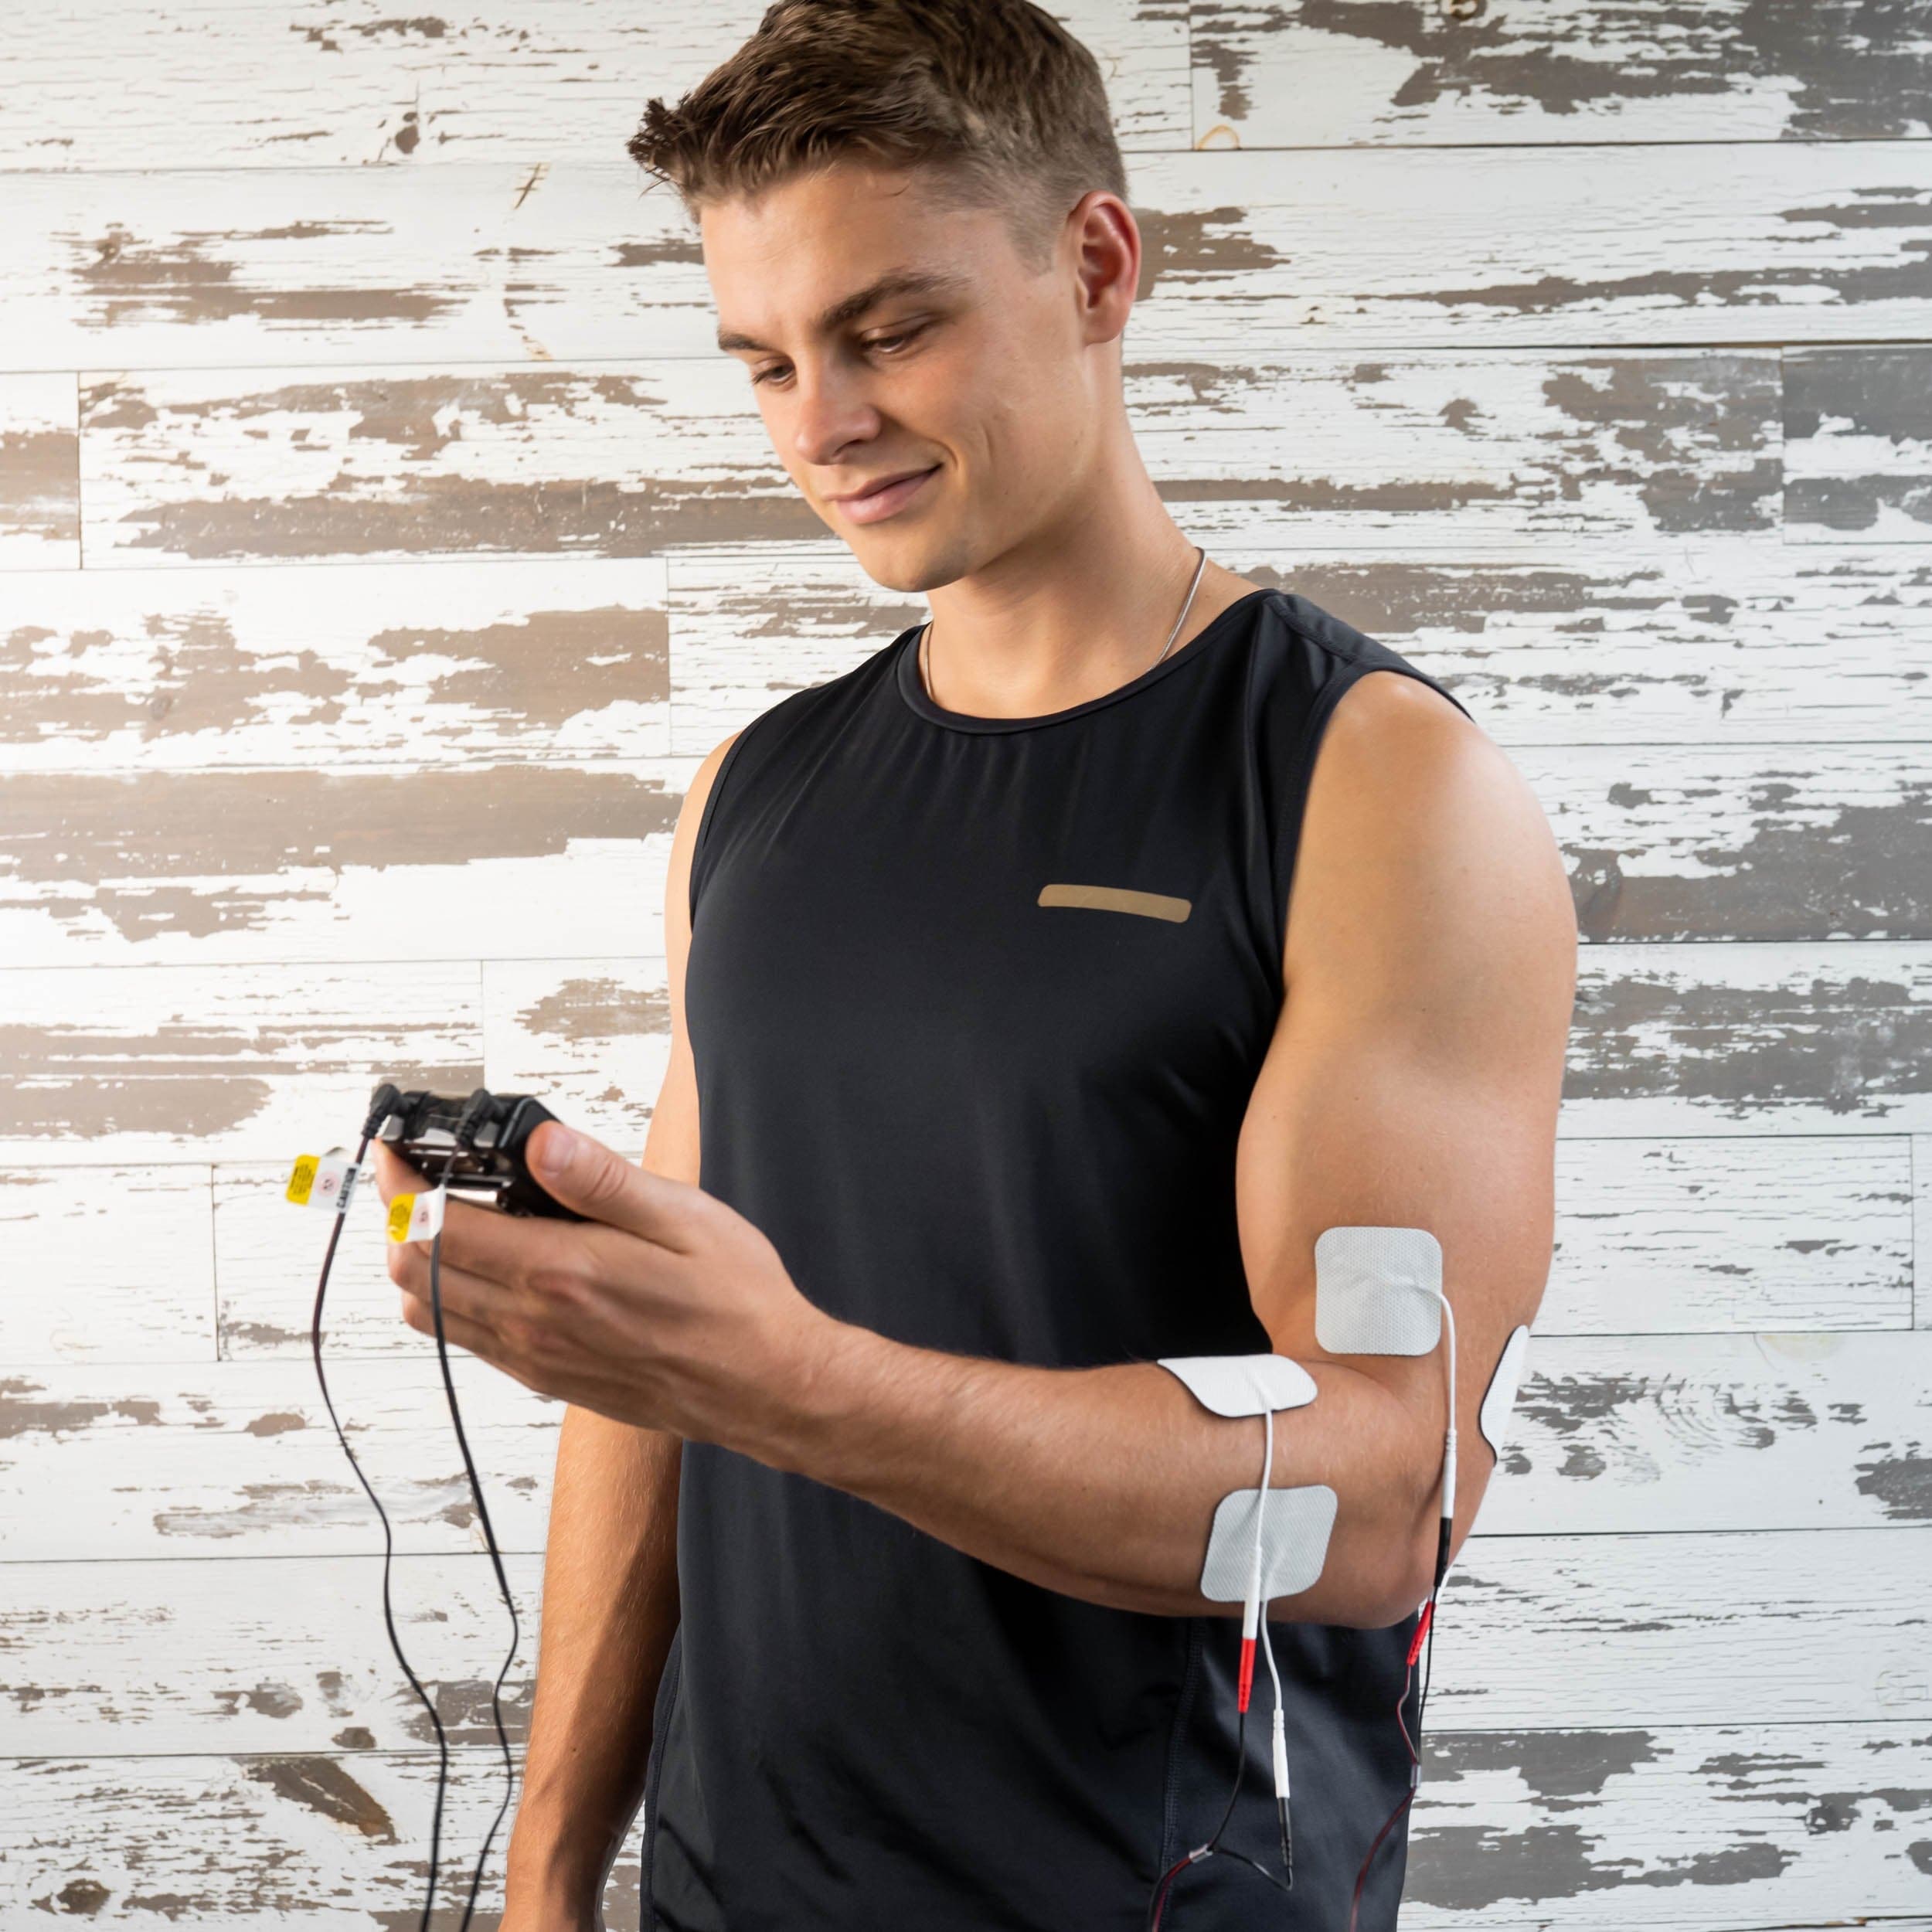 TENS EMS Muscle Stimulator is 30% off